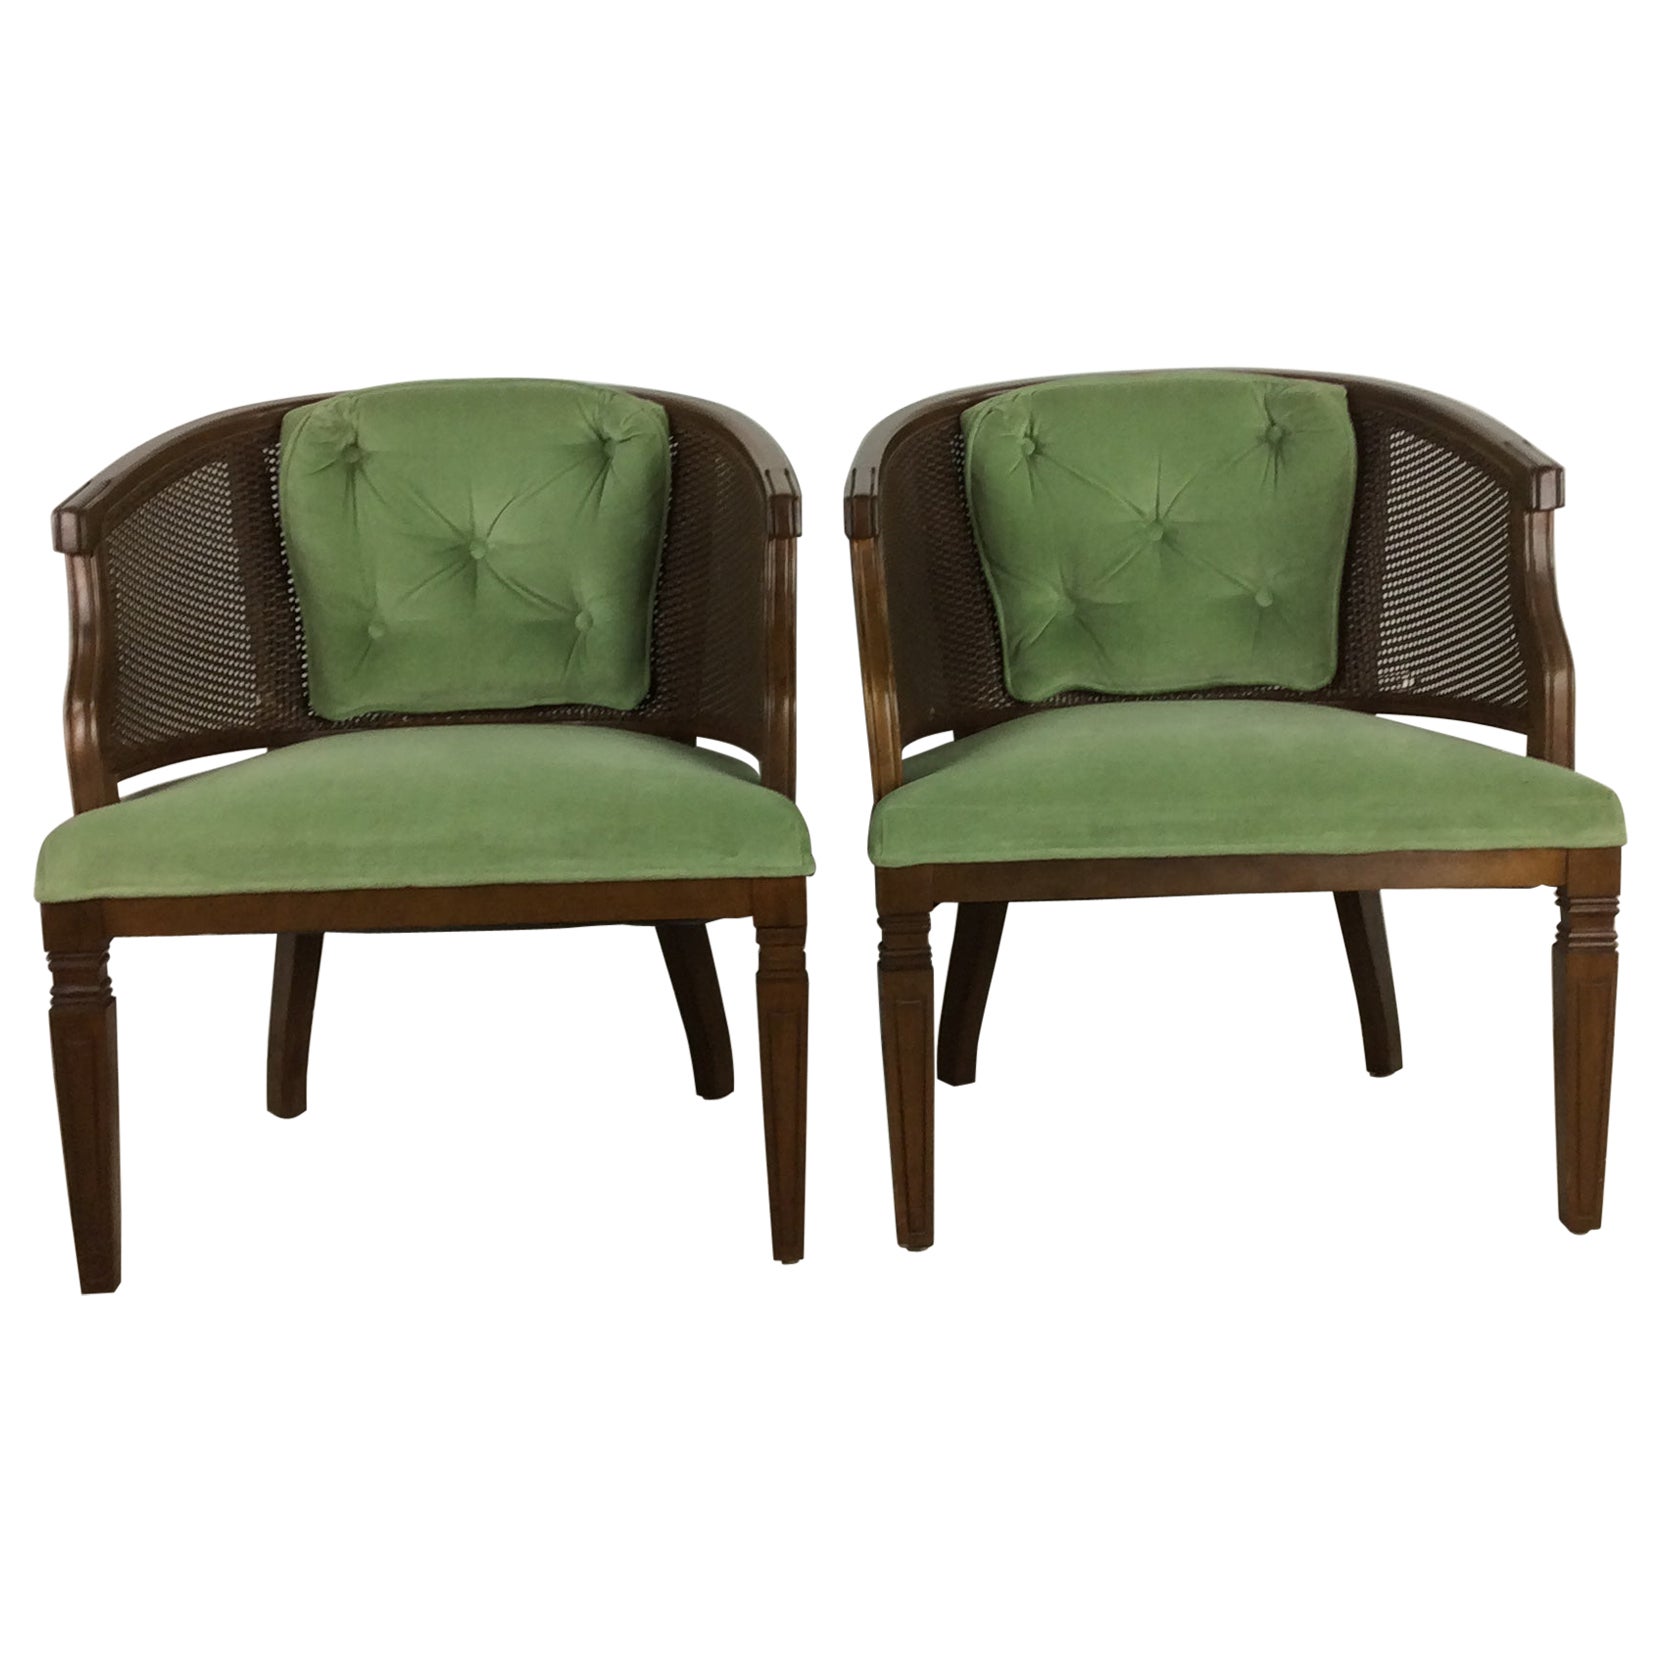 Pair of Mid-Century Modern Green Tufted Accent Chairs with Caning